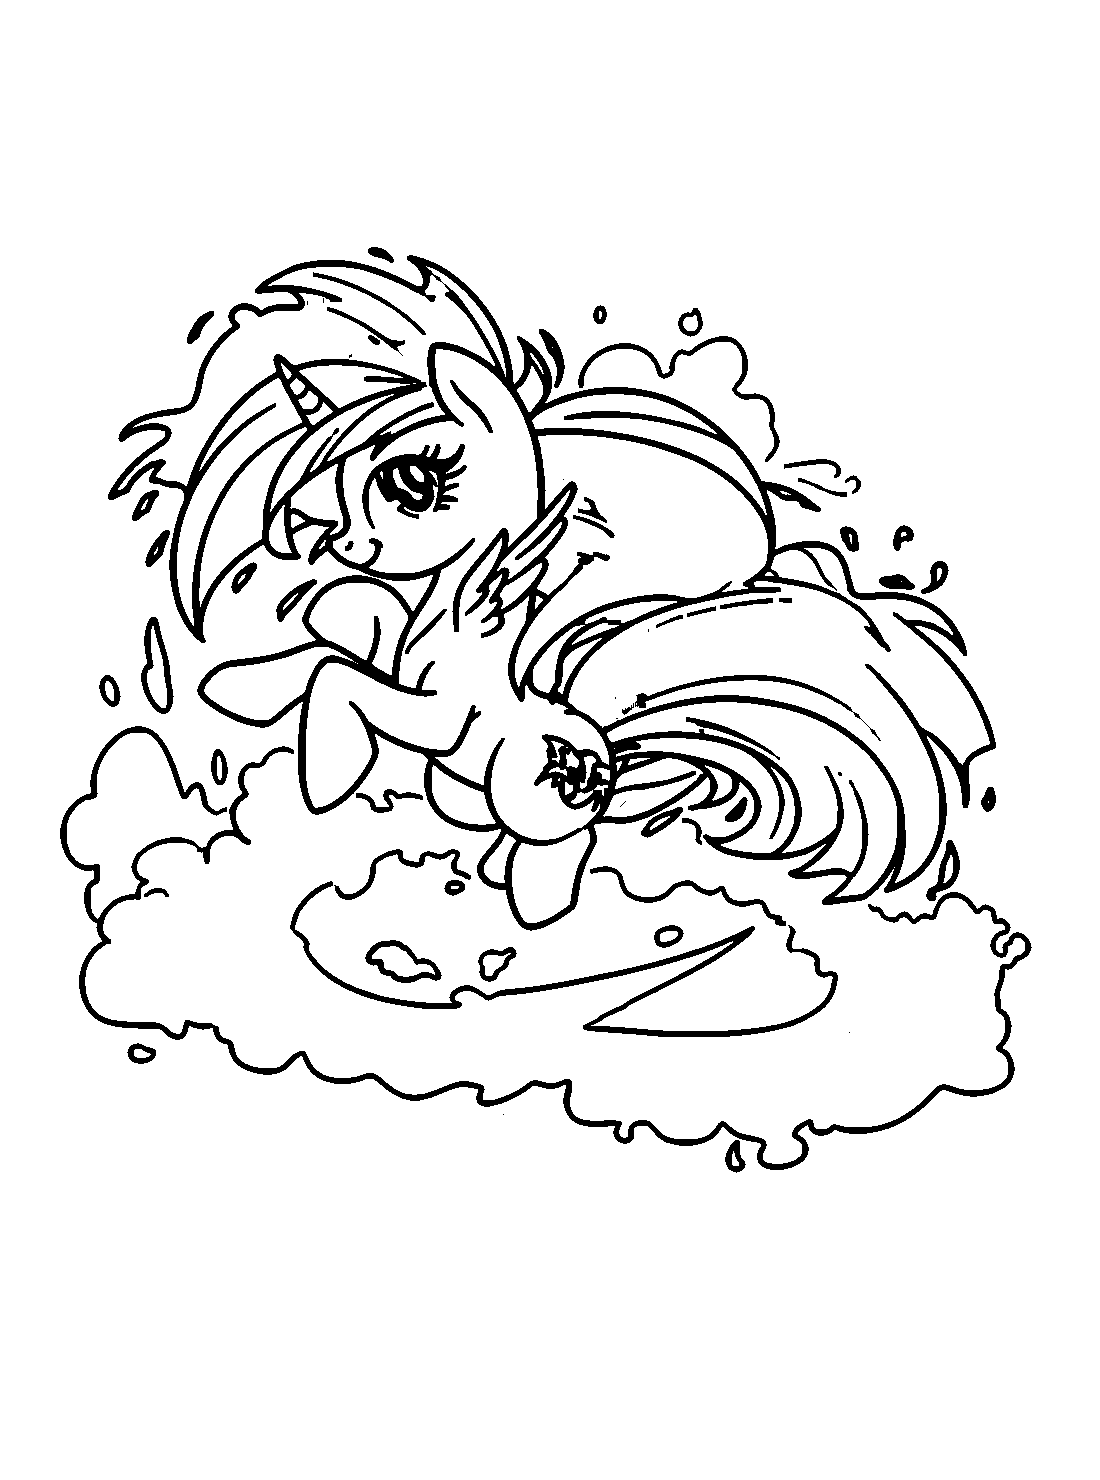 Sweet Princess Rainbow Dash Coloring Pages